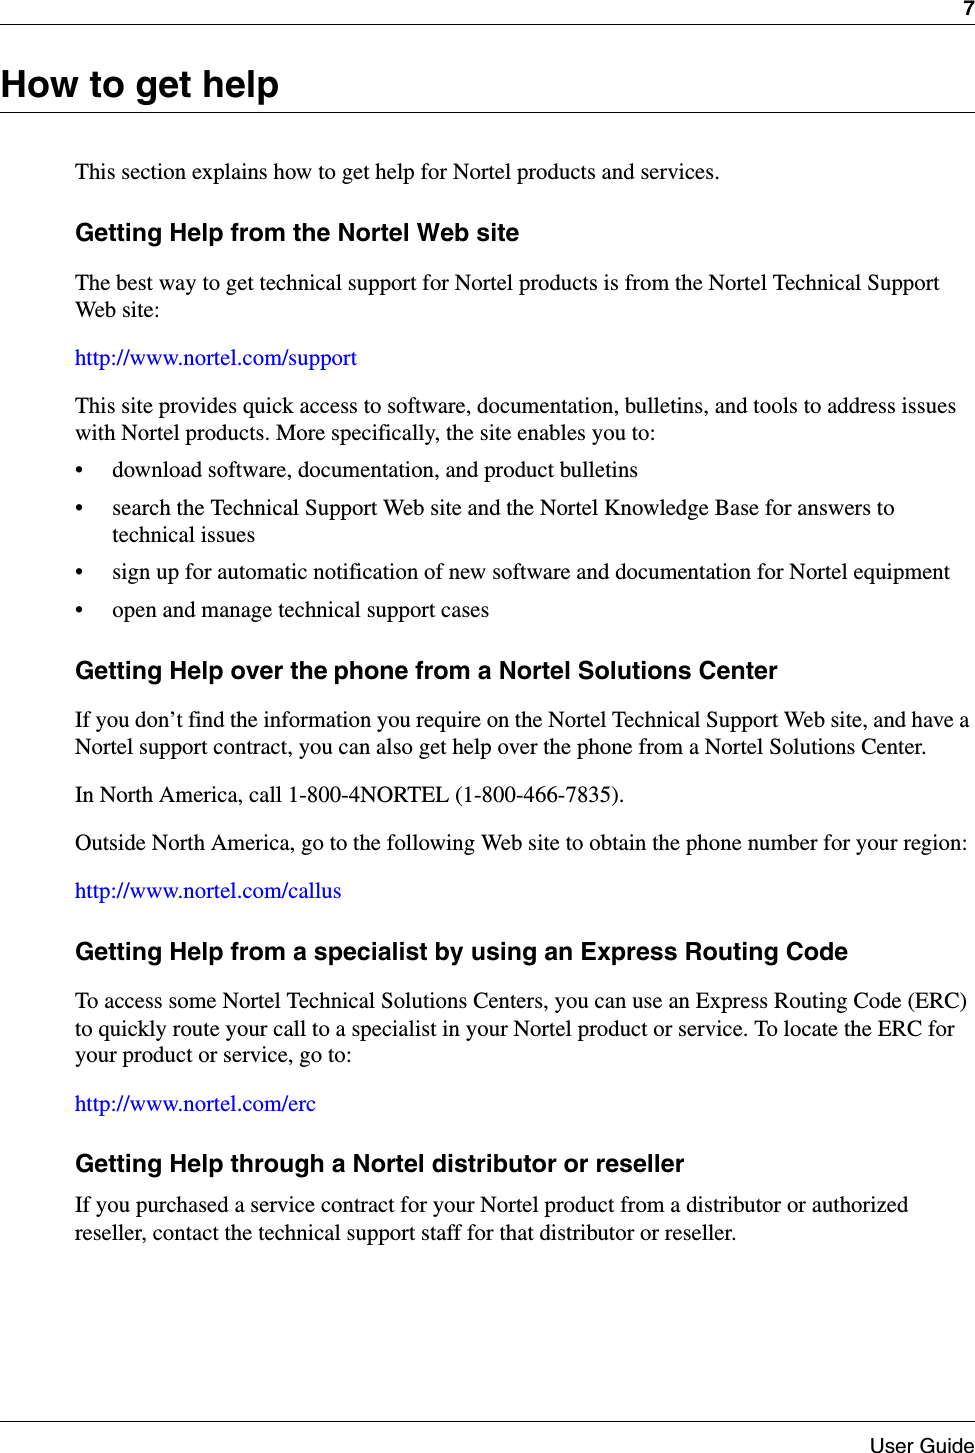 7User GuideHow to get helpThis section explains how to get help for Nortel products and services.Getting Help from the Nortel Web siteThe best way to get technical support for Nortel products is from the Nortel Technical Support Web site:http://www.nortel.com/supportThis site provides quick access to software, documentation, bulletins, and tools to address issues with Nortel products. More specifically, the site enables you to:• download software, documentation, and product bulletins• search the Technical Support Web site and the Nortel Knowledge Base for answers to technical issues• sign up for automatic notification of new software and documentation for Nortel equipment• open and manage technical support casesGetting Help over the phone from a Nortel Solutions CenterIf you don’t find the information you require on the Nortel Technical Support Web site, and have a Nortel support contract, you can also get help over the phone from a Nortel Solutions Center.In North America, call 1-800-4NORTEL (1-800-466-7835).Outside North America, go to the following Web site to obtain the phone number for your region:http://www.nortel.com/callusGetting Help from a specialist by using an Express Routing CodeTo access some Nortel Technical Solutions Centers, you can use an Express Routing Code (ERC) to quickly route your call to a specialist in your Nortel product or service. To locate the ERC for your product or service, go to:http://www.nortel.com/ercGetting Help through a Nortel distributor or reseller If you purchased a service contract for your Nortel product from a distributor or authorized reseller, contact the technical support staff for that distributor or reseller.